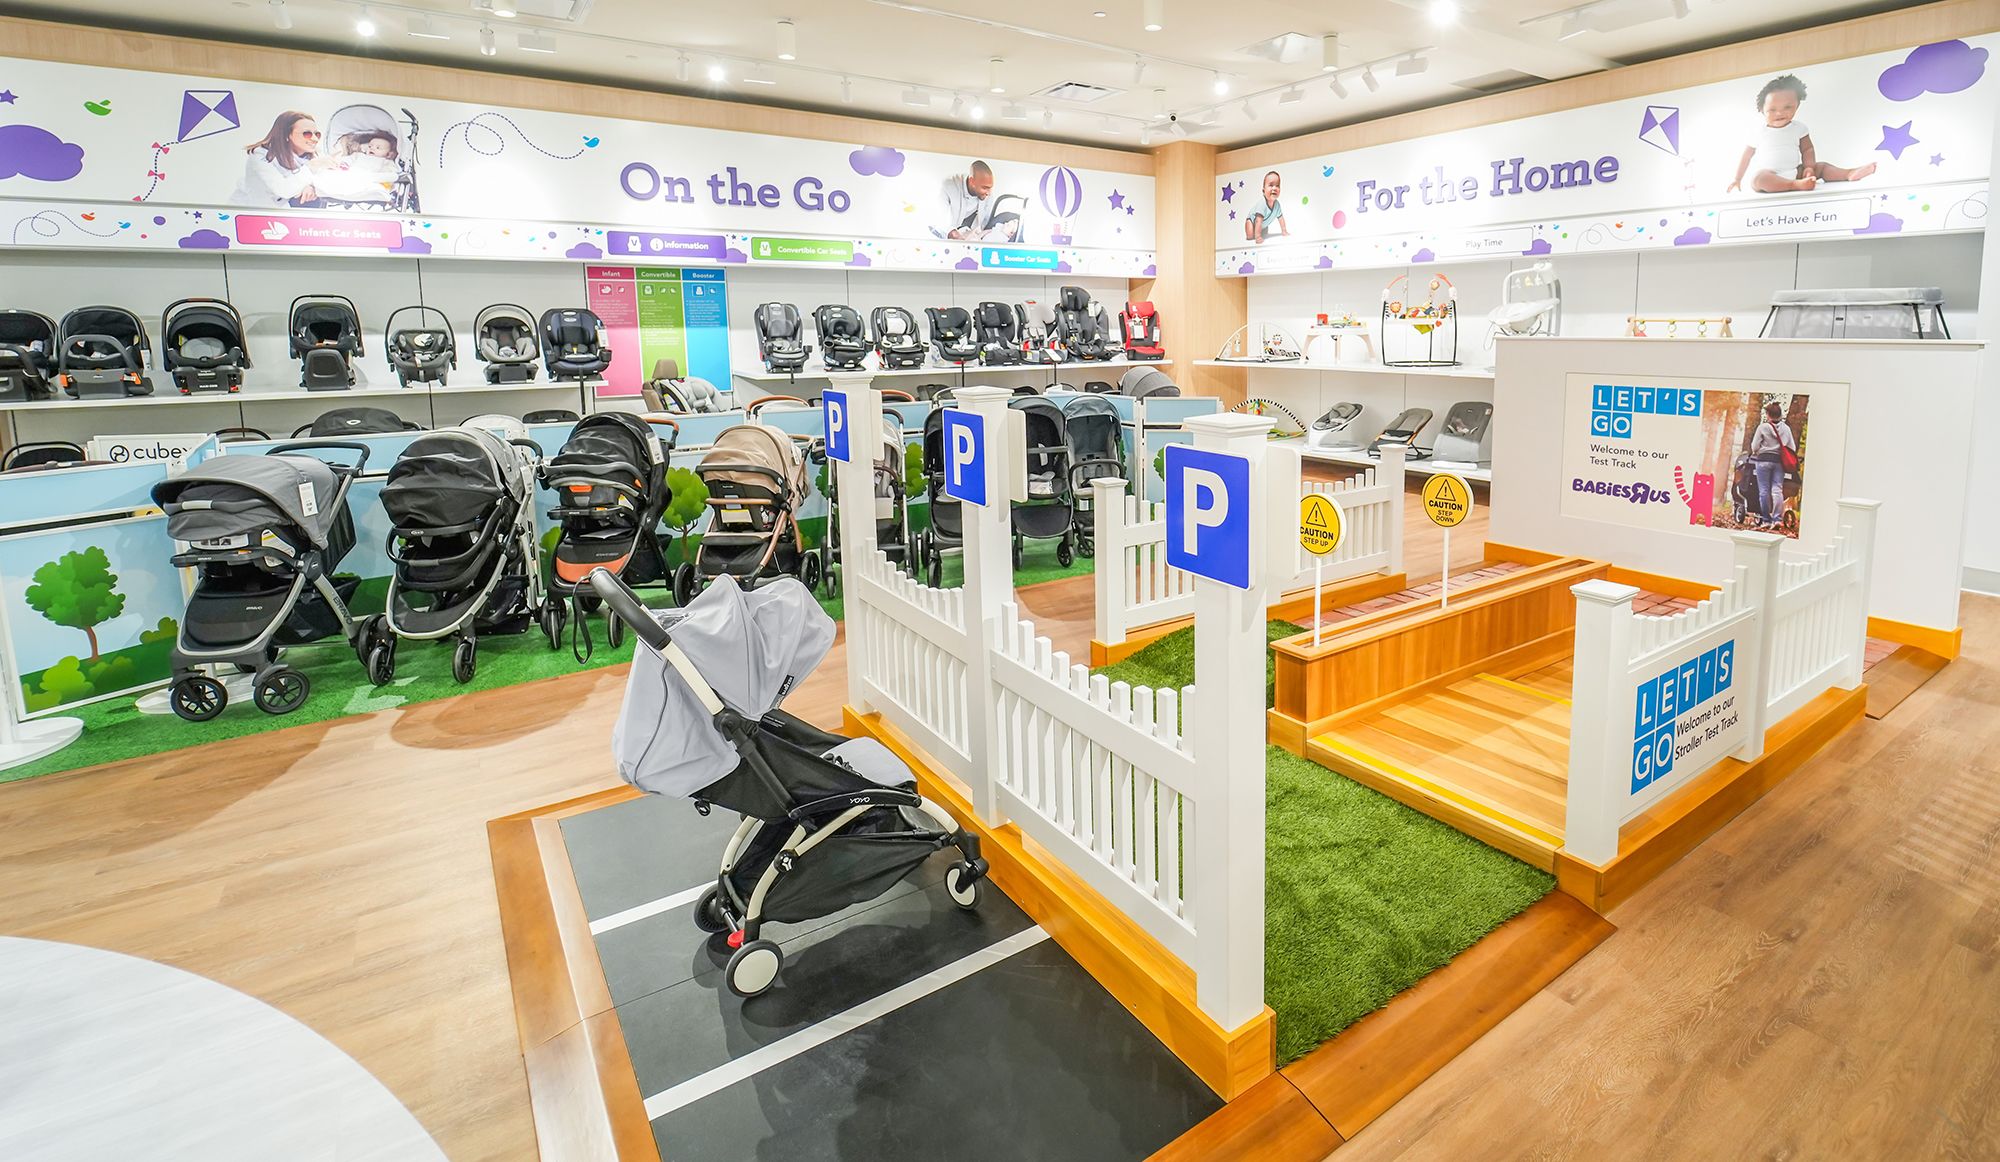 Babies R Us was gone for good. Now it's back with a new US flagship store